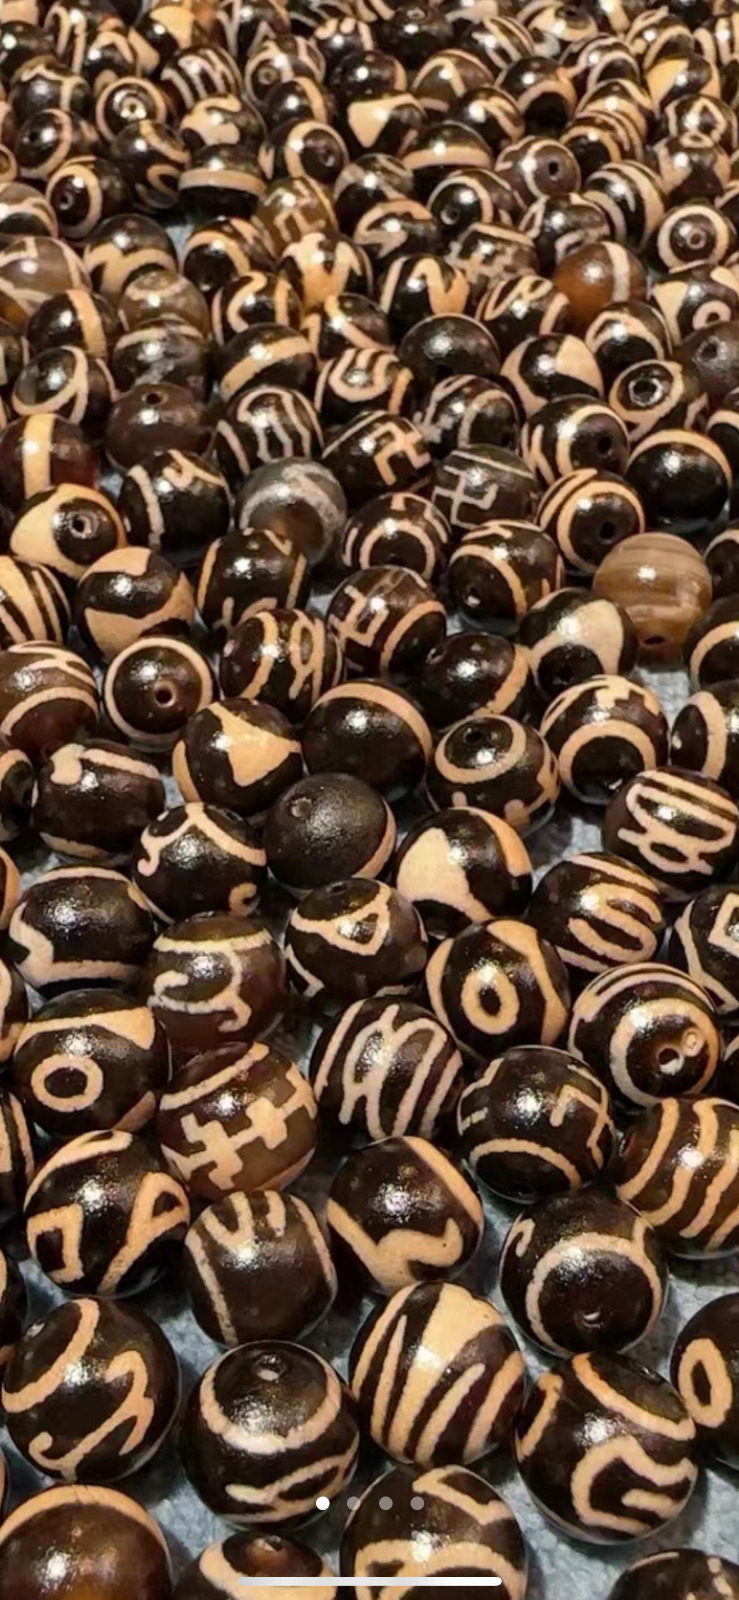 200 Pcs Excellent Rare Tibetan Natural Old Agate Dzi 10mm *FengShui* Round Beads